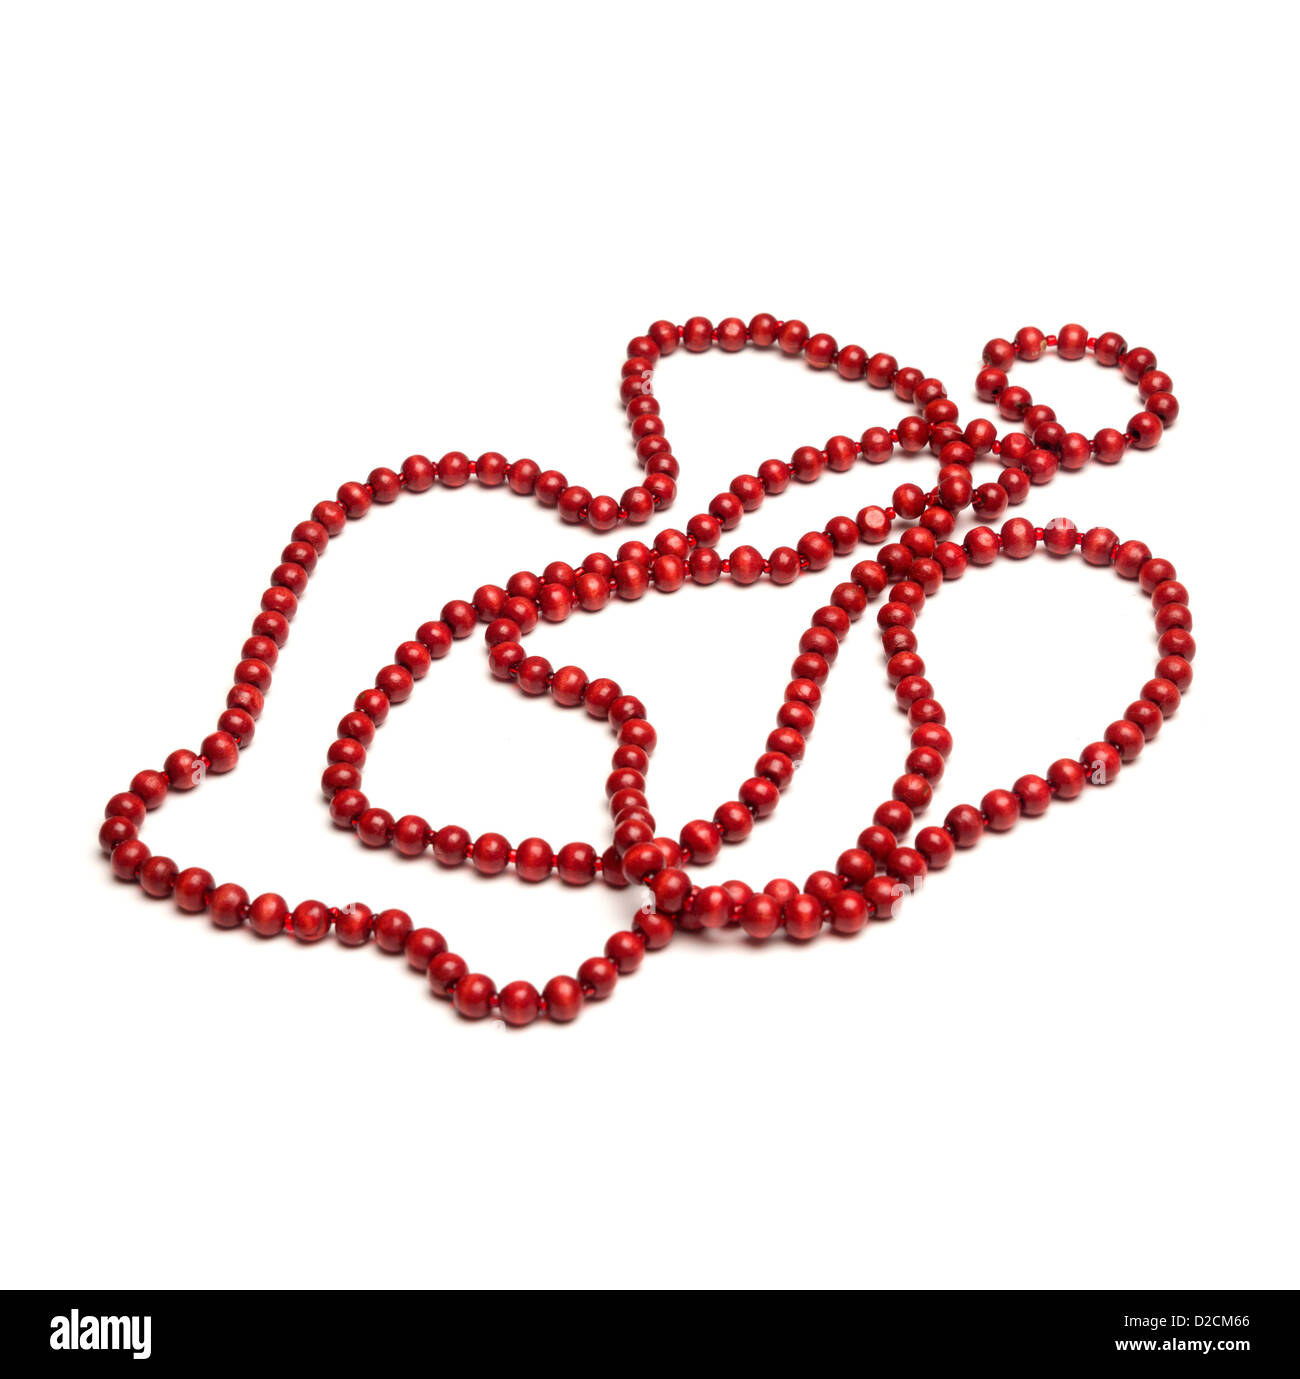 Red necklace isolated on white background Stock Photo